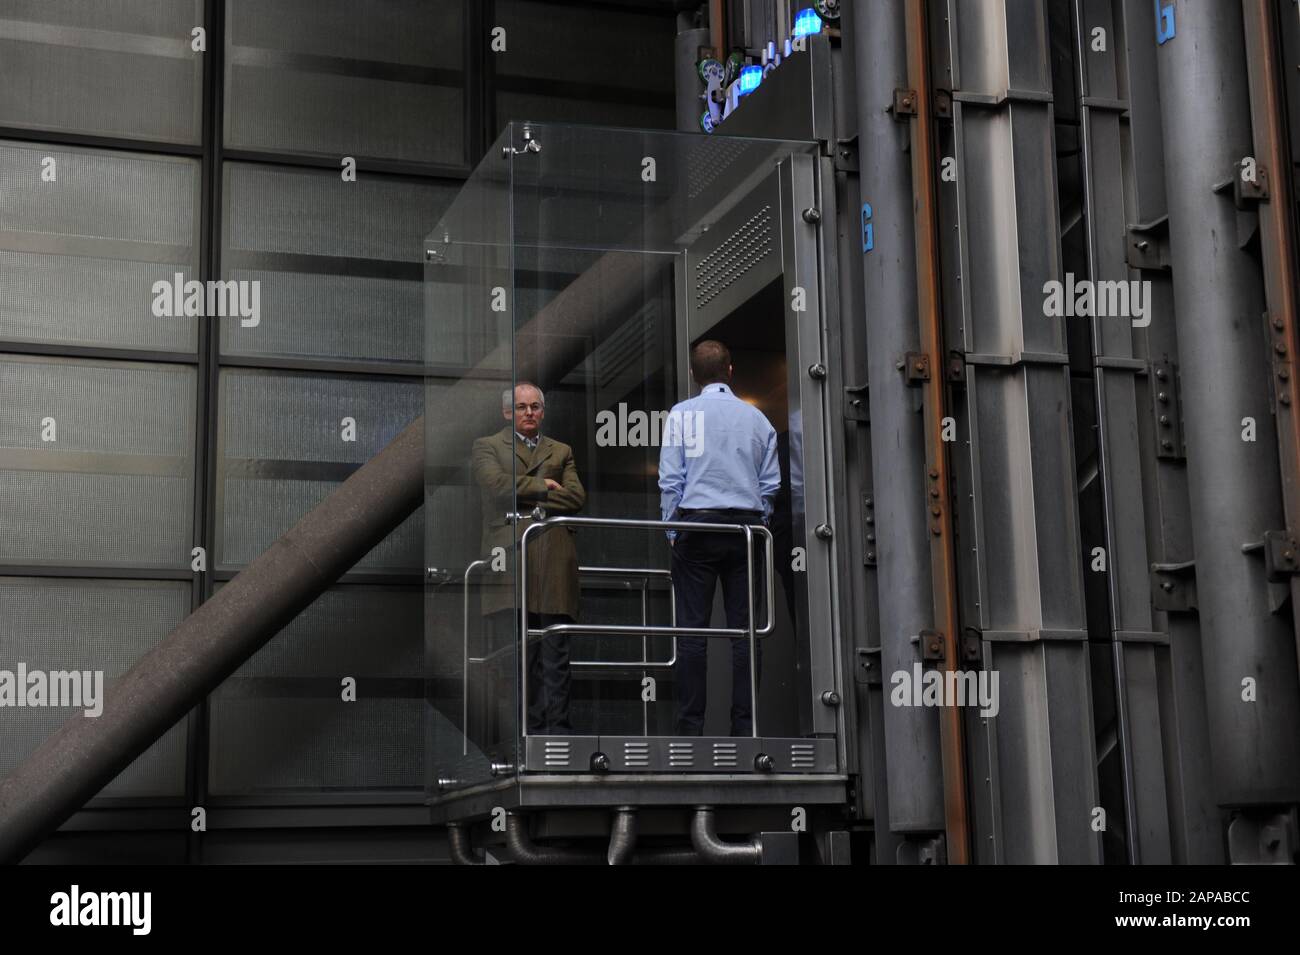 People ride in the lifts at The Lloyd's of London building in Lime Street, London, England Stock Photo